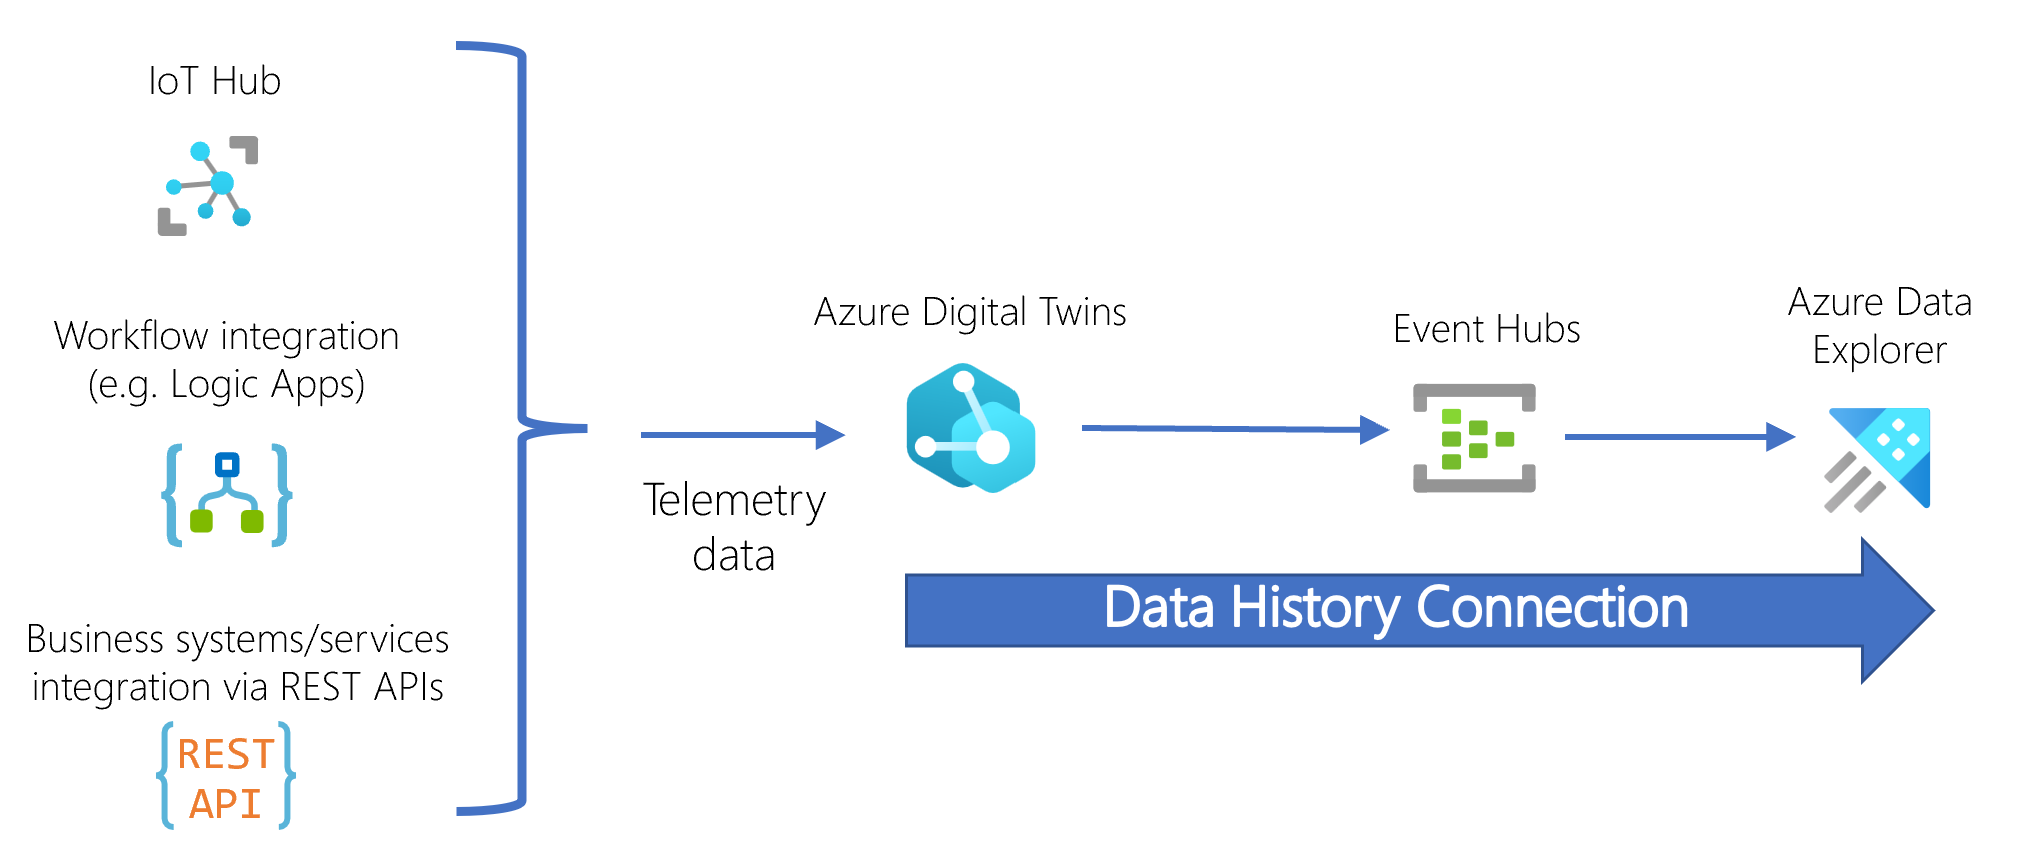 Diagram showing the flow of device telemetry data into Azure Digital Twins, through an event hub, to Azure Data Explorer.